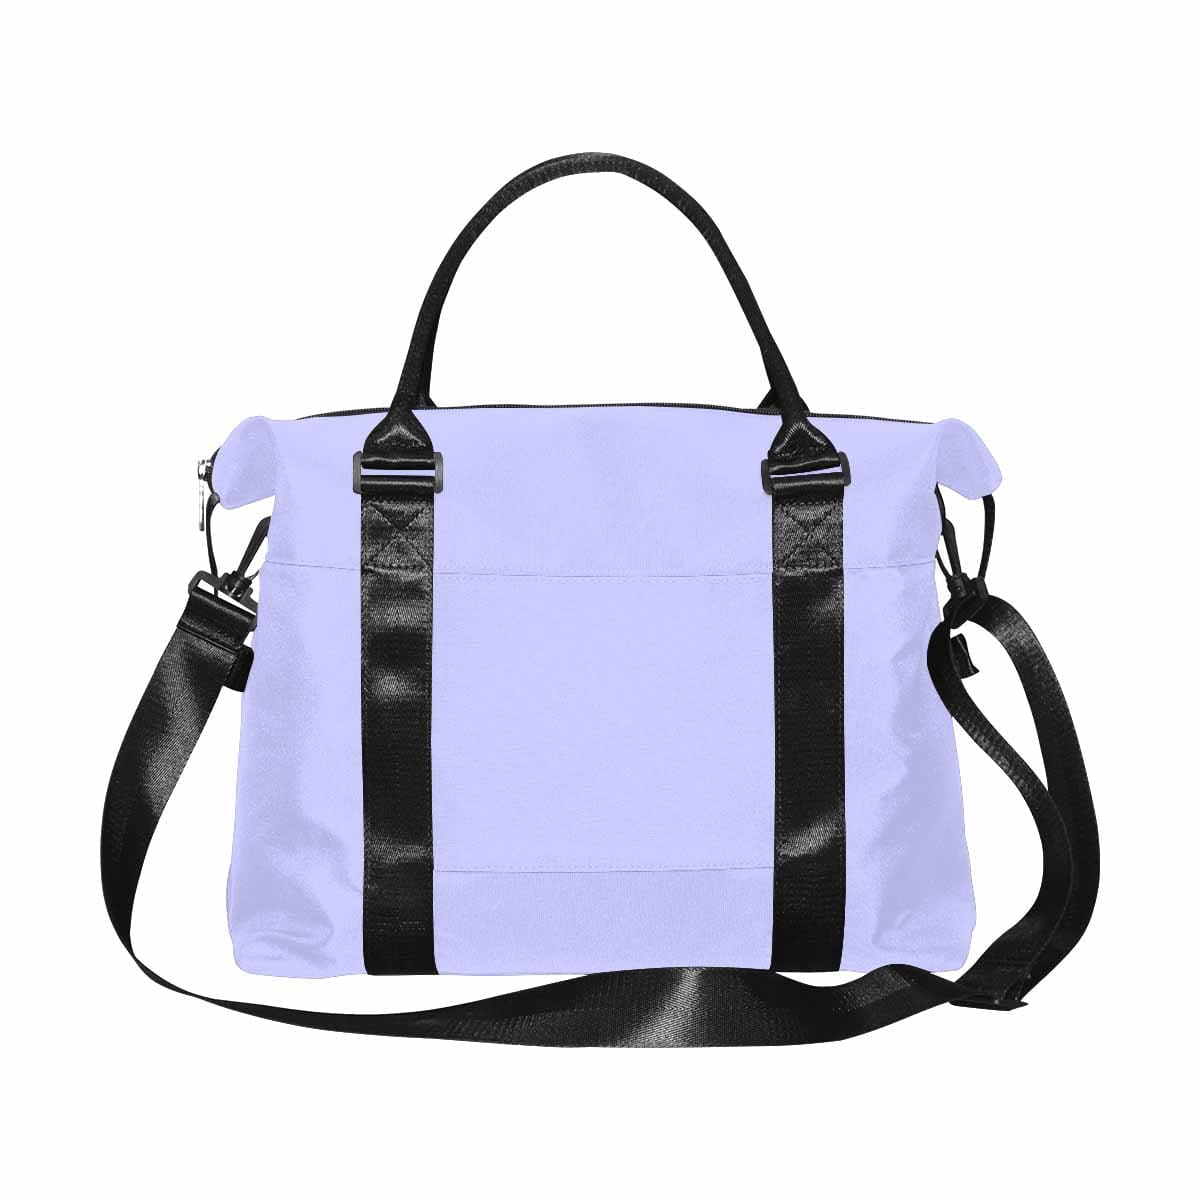 Travel Bag Periwinkle Purple Canvas Carry On - Bags | Travel Bags | Canvas